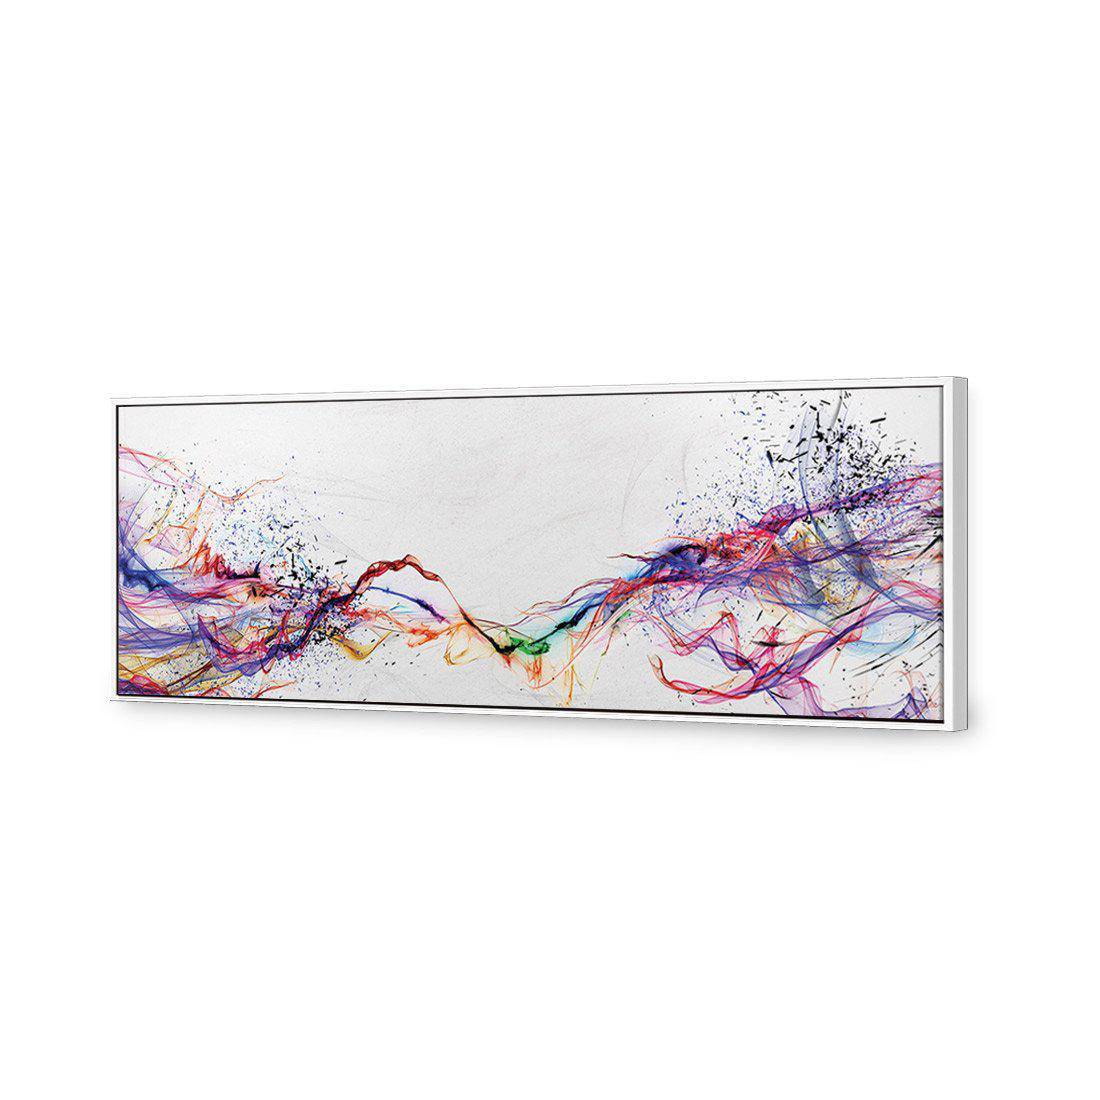 Electricity On Black, Inverted Canvas Art-Canvas-Wall Art Designs-60x20cm-Canvas - White Frame-Wall Art Designs